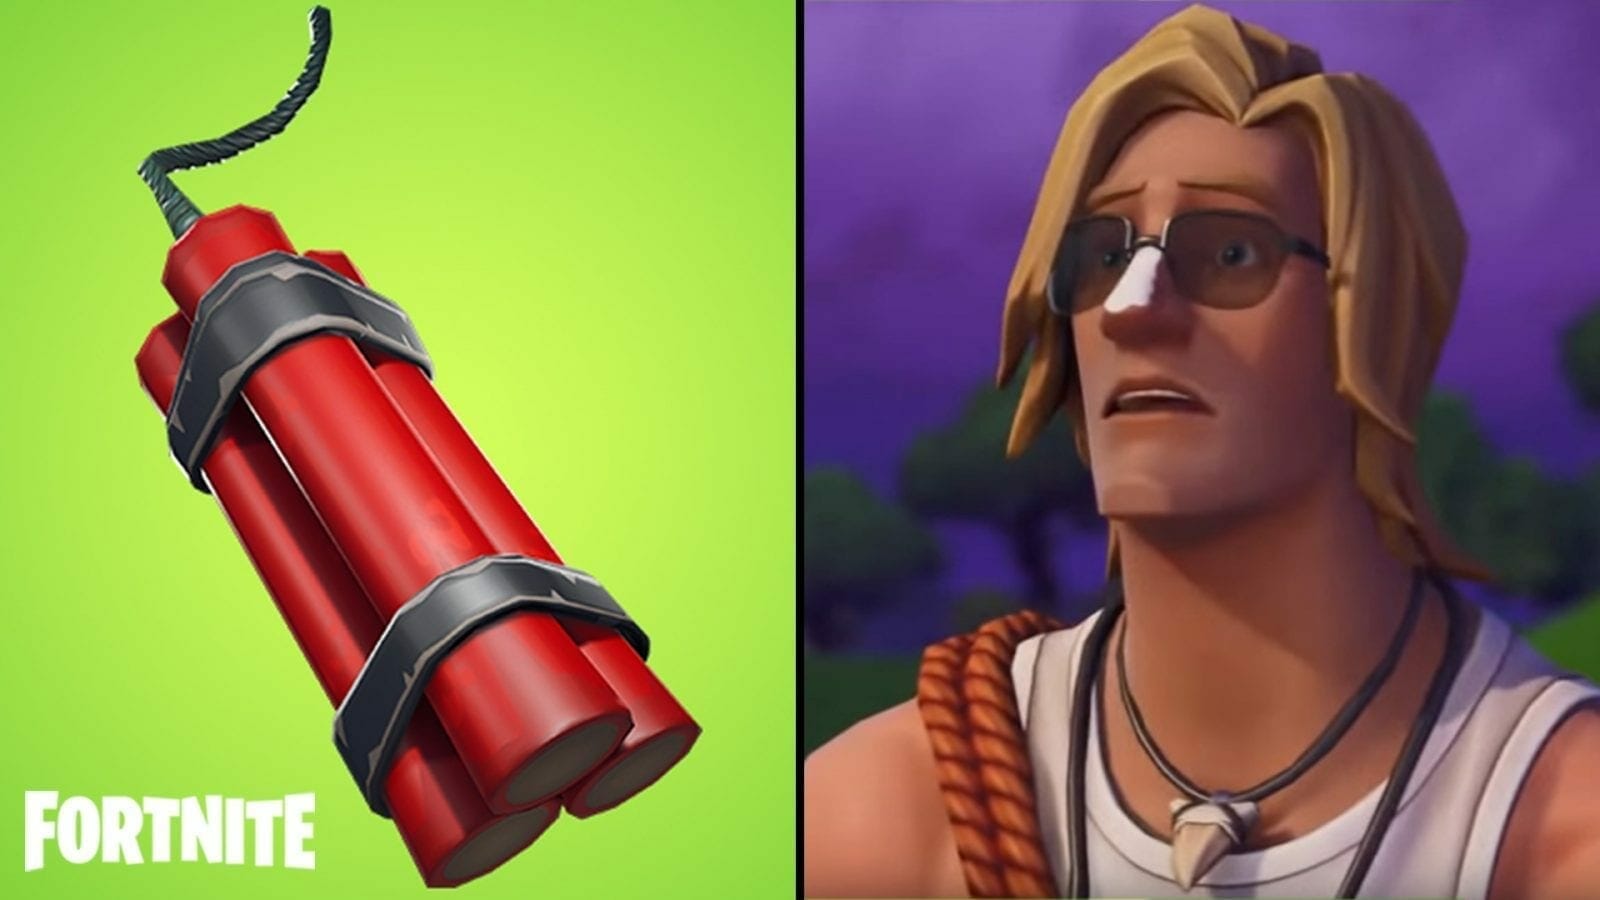 Fortnite V6 30 Content Update Patch Notes Released Brings Dynamite - fotnite 6 30 update brings dynamite and other new content